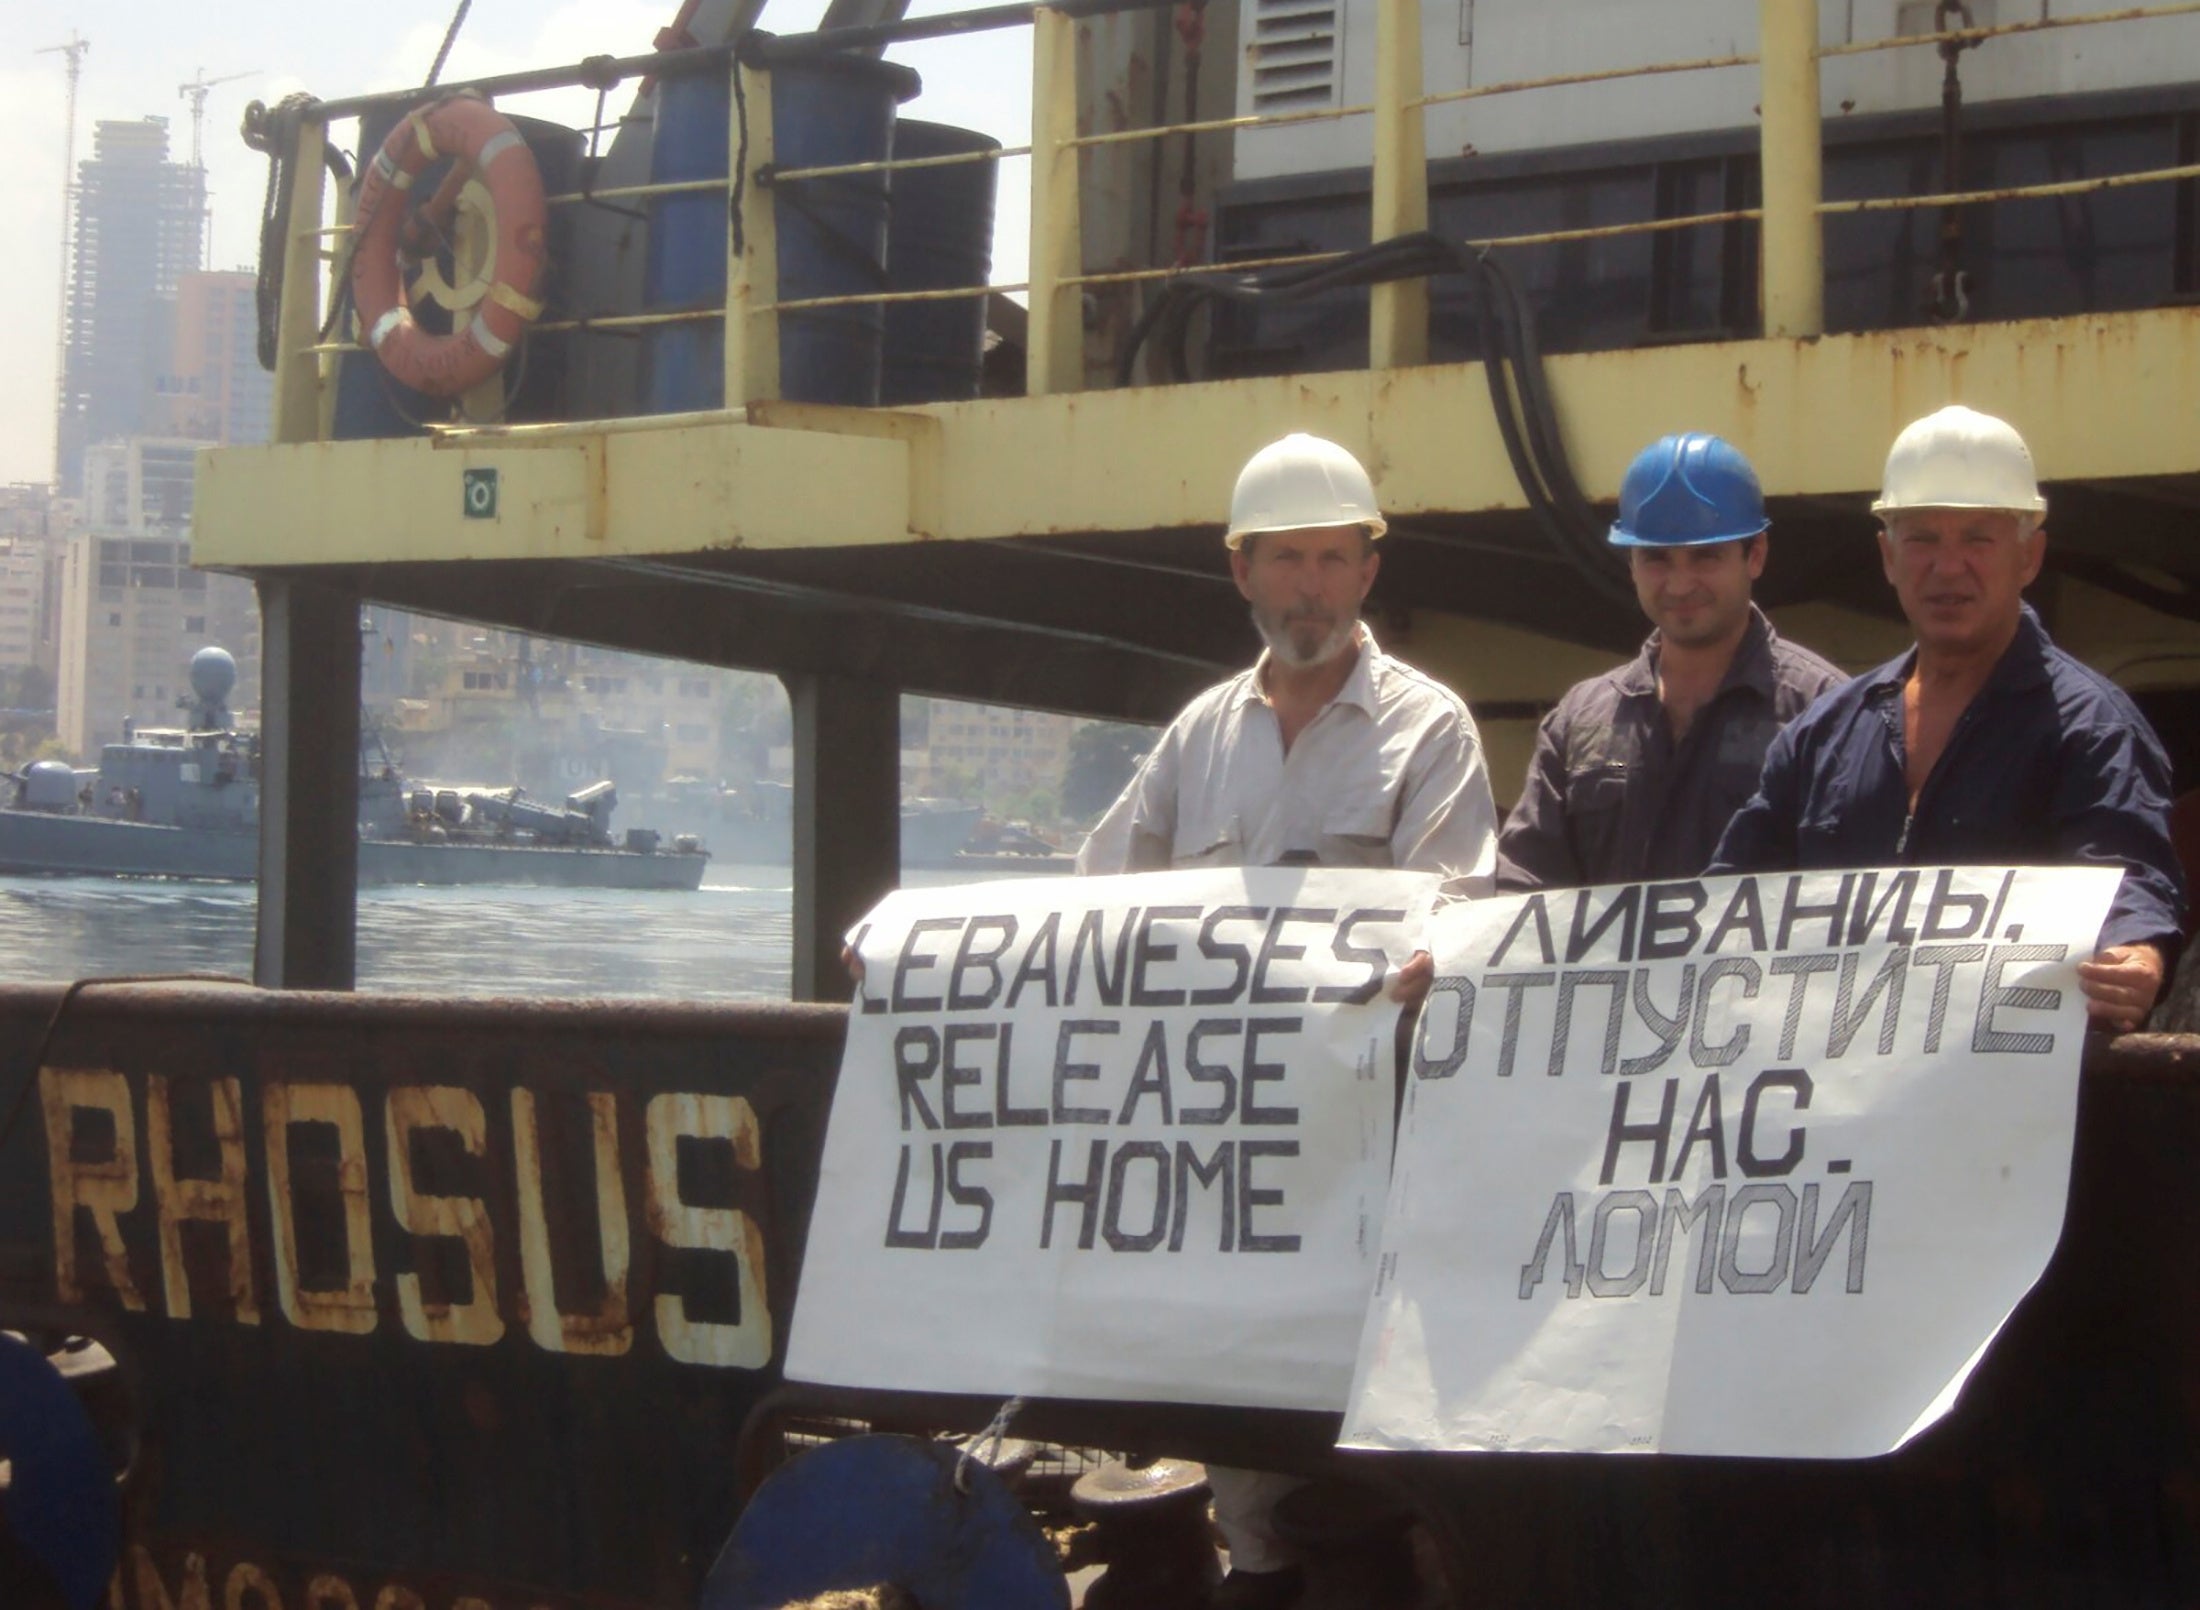 Captain Boris Prokoshev and crew members demand their release from the arrested cargo vessel Rhosus in the port of Beirut in summer 2014